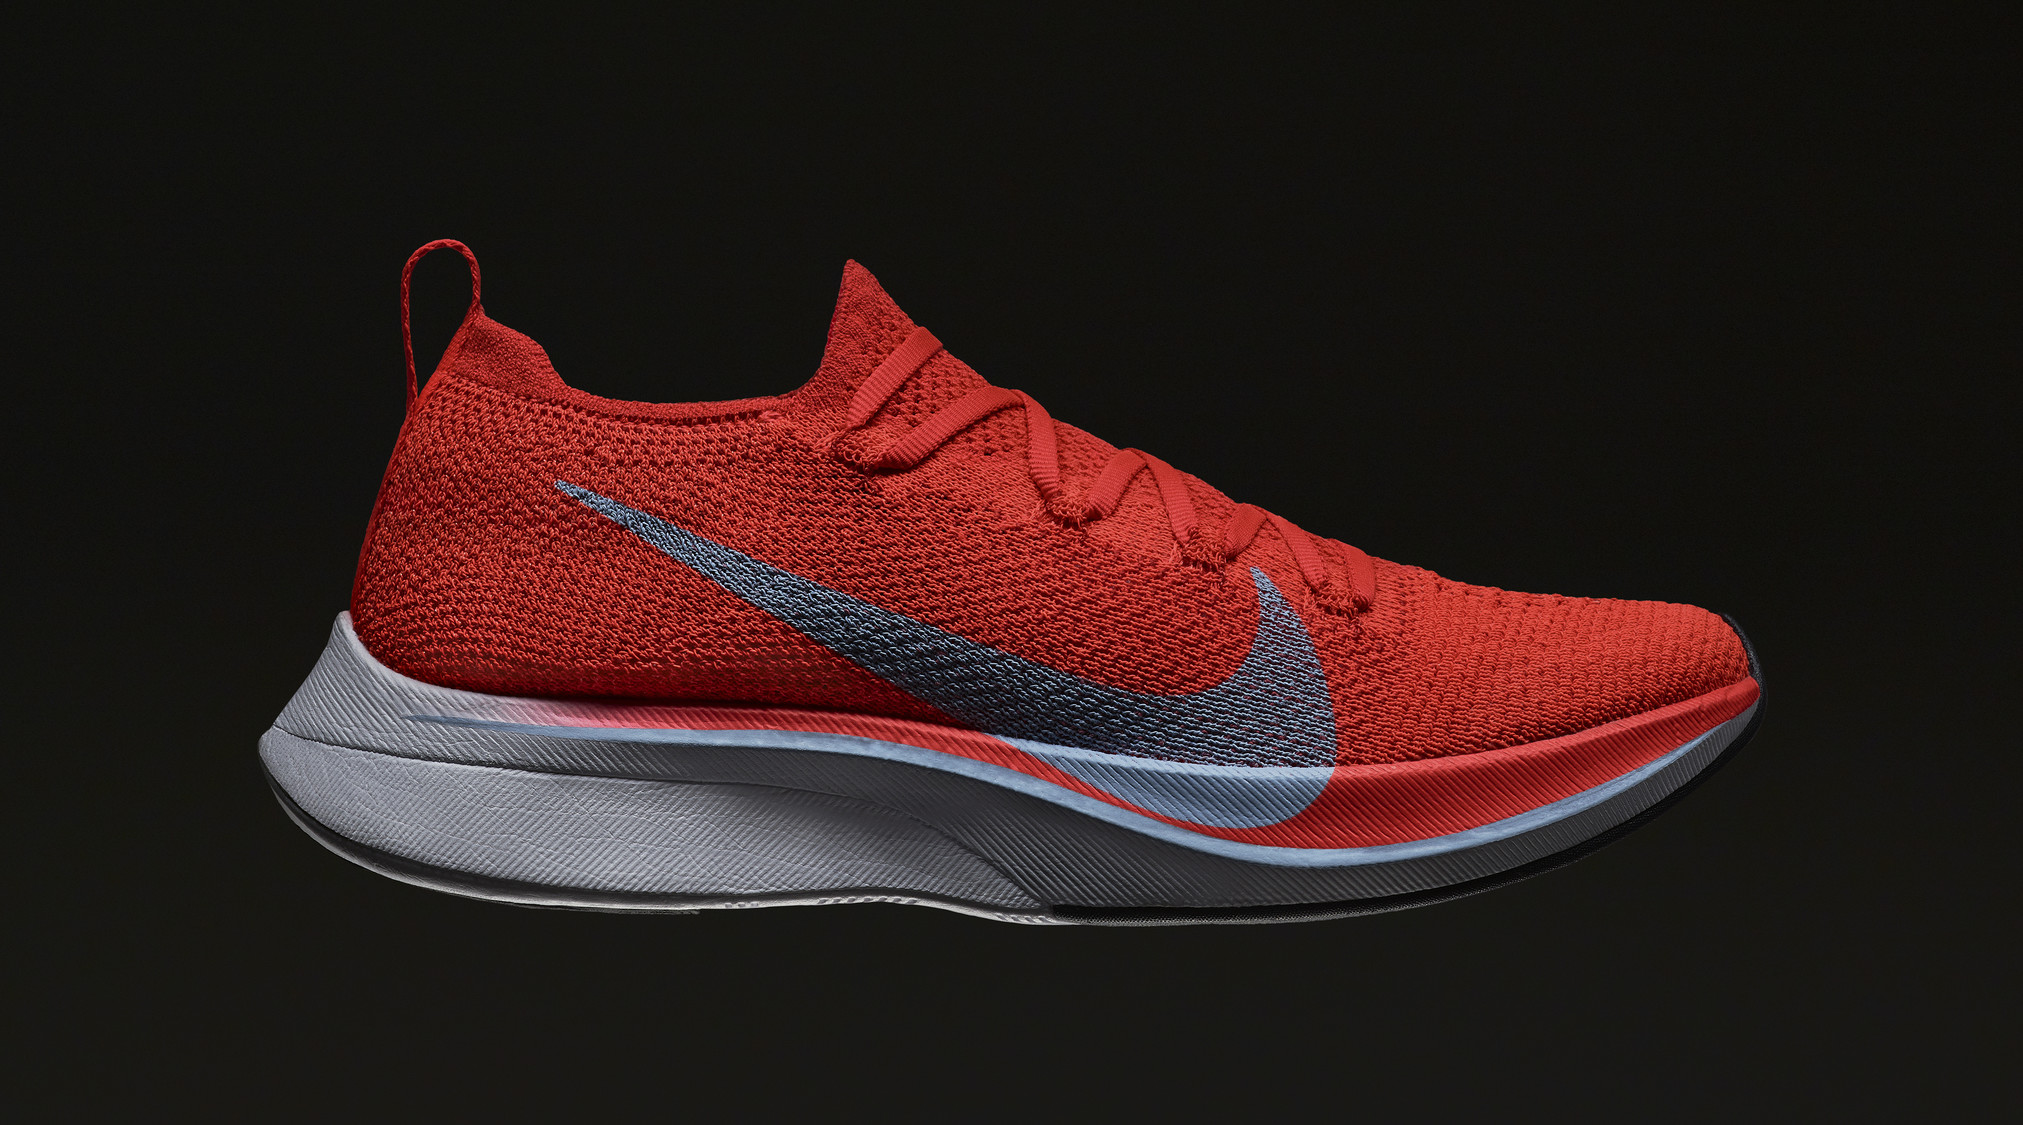 Mujer hermosa jurar Hazlo pesado Nike Adds Flyknit to Two of Its High Performance Runners | Complex